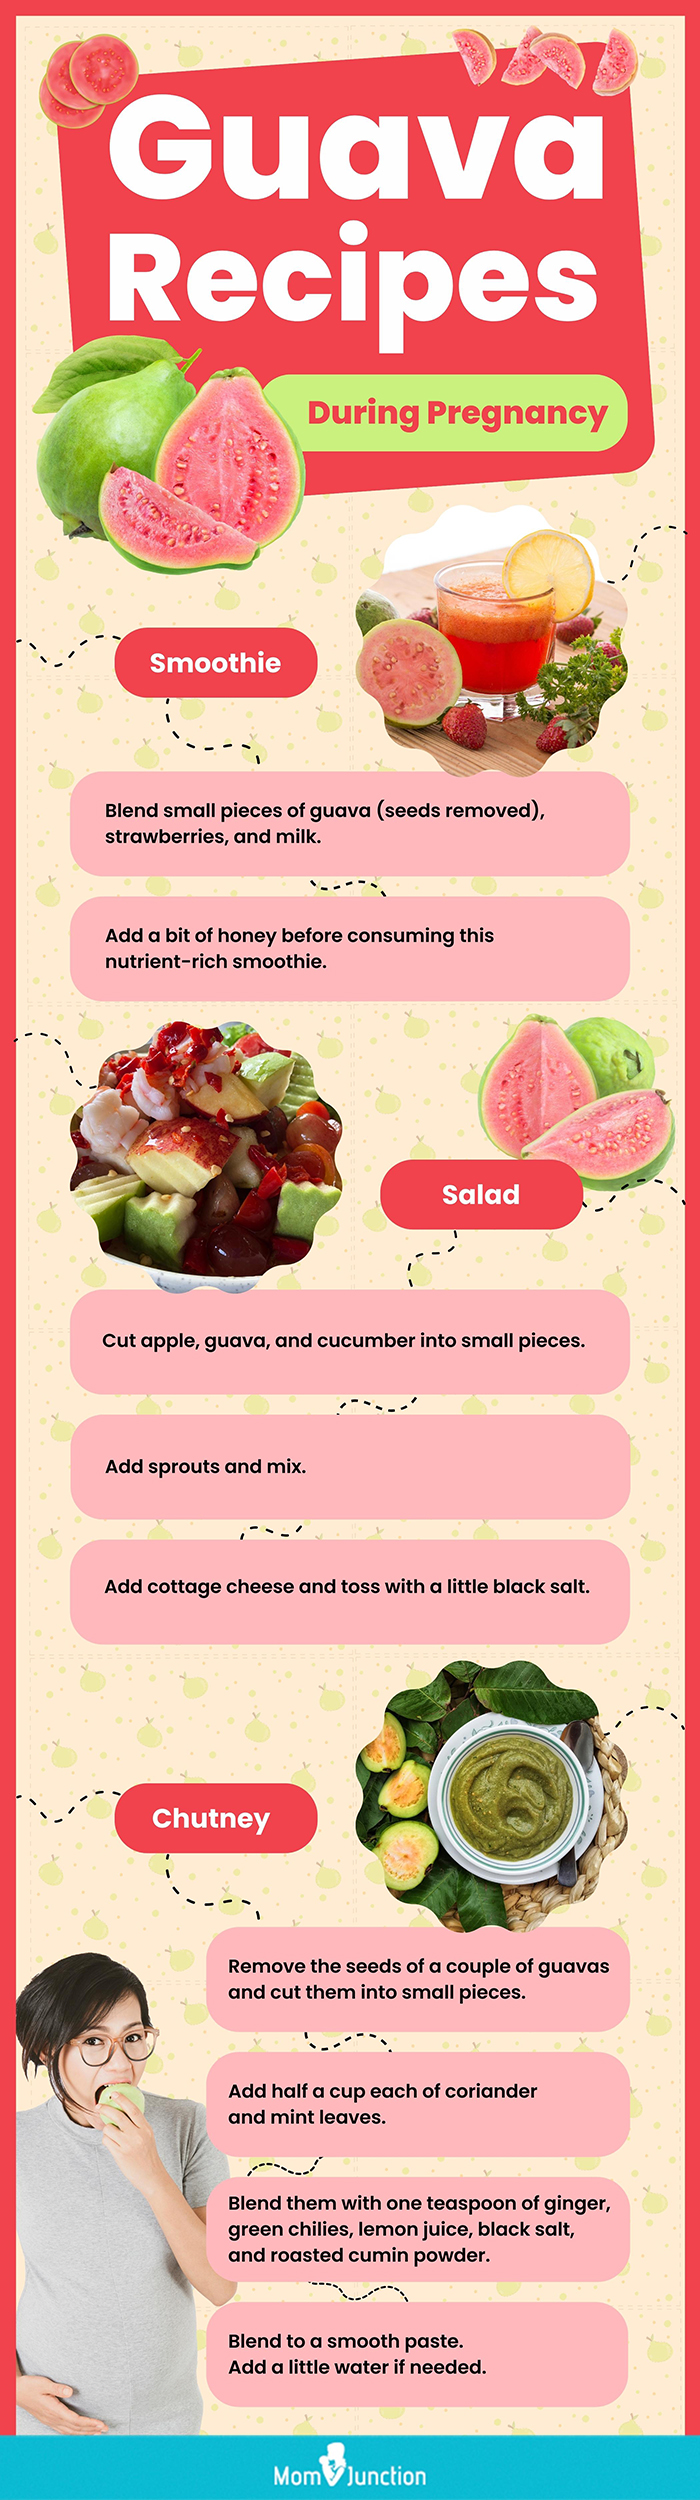 guava recipes during pregnancy (infographic)